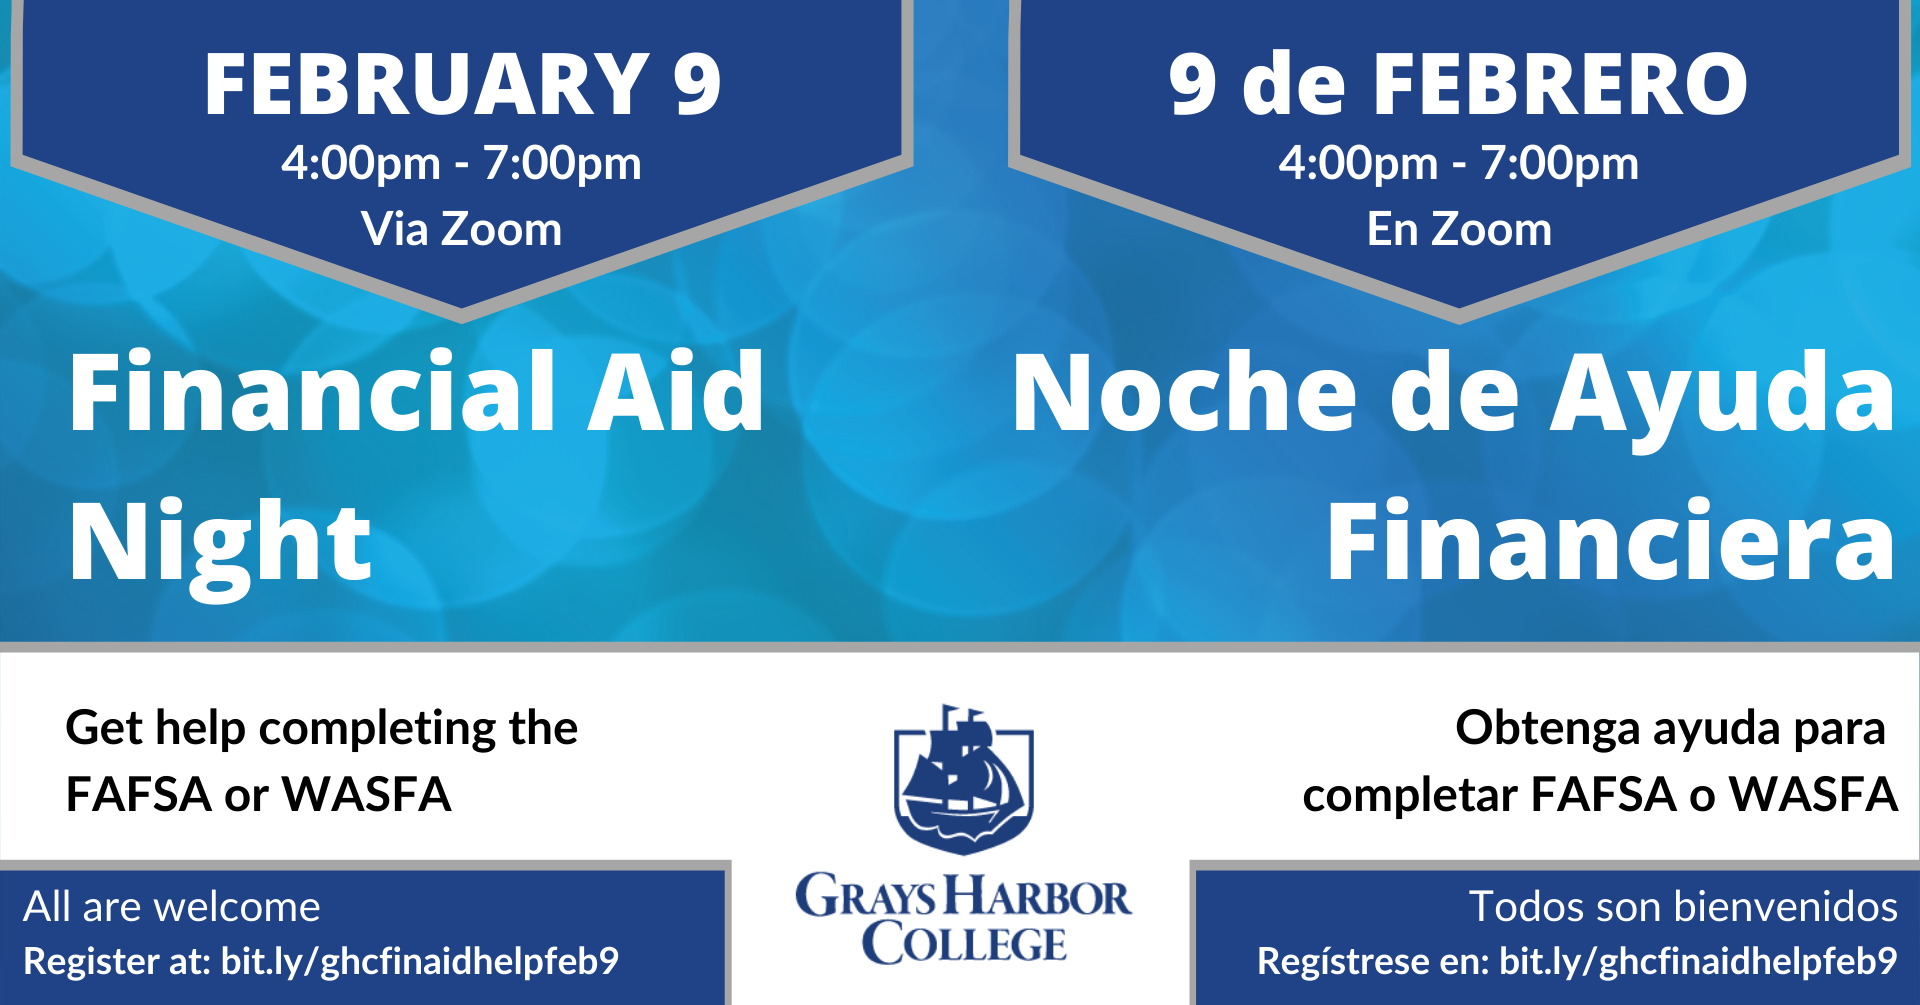 February 9 4:00pm - 7:00pm via Zoom. Get help completing the FAFSA or WASFA. All are welcome